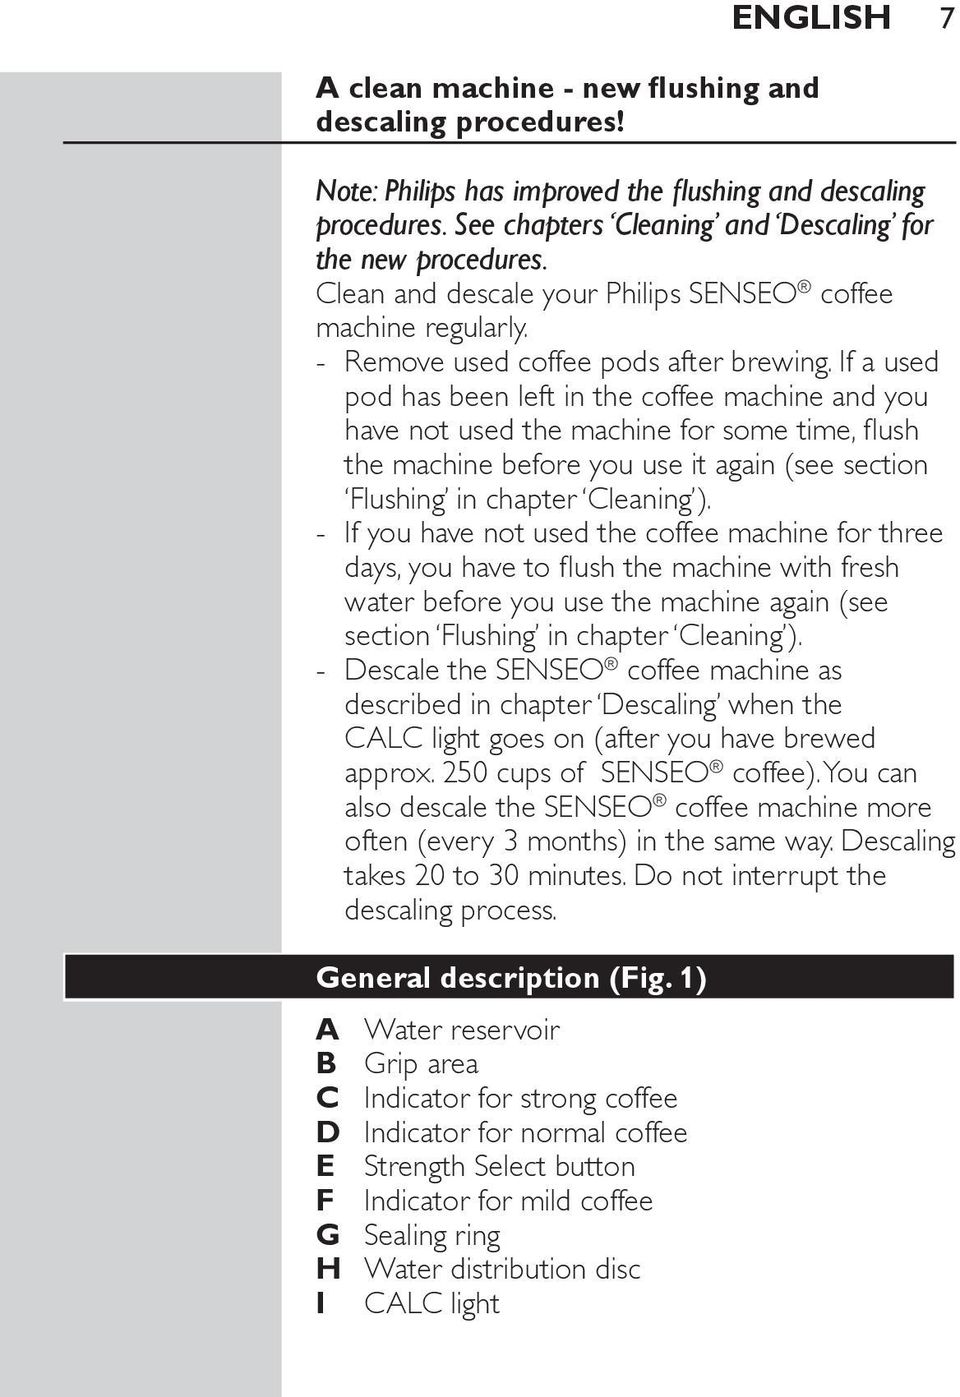 If a used pod has been left in the coffee machine and you have not used the machine for some time, flush the machine before you use it again (see section Flushing in chapter Cleaning ).